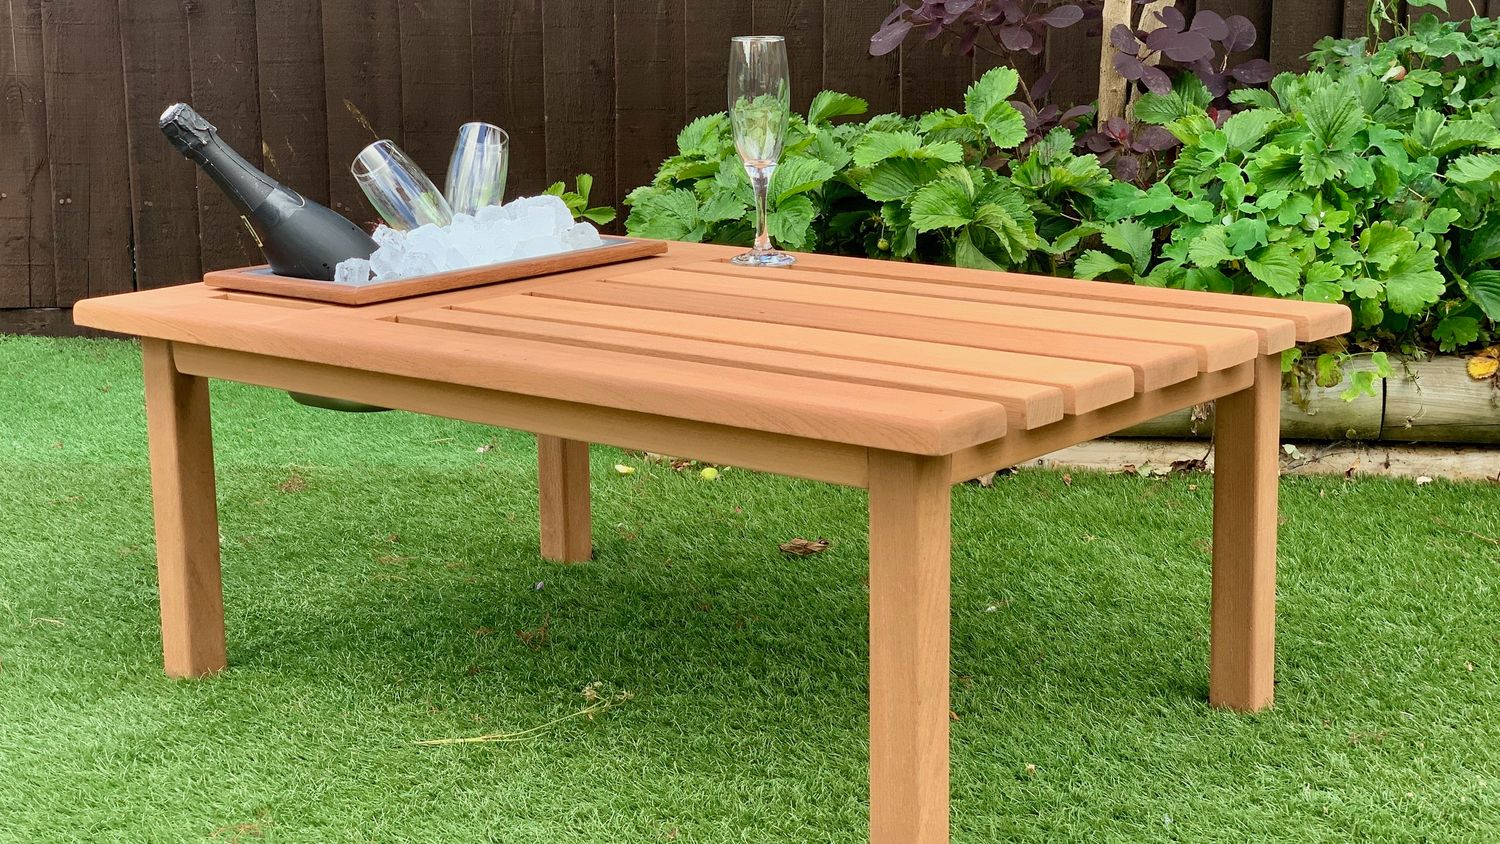 Sapele garden table with ice well